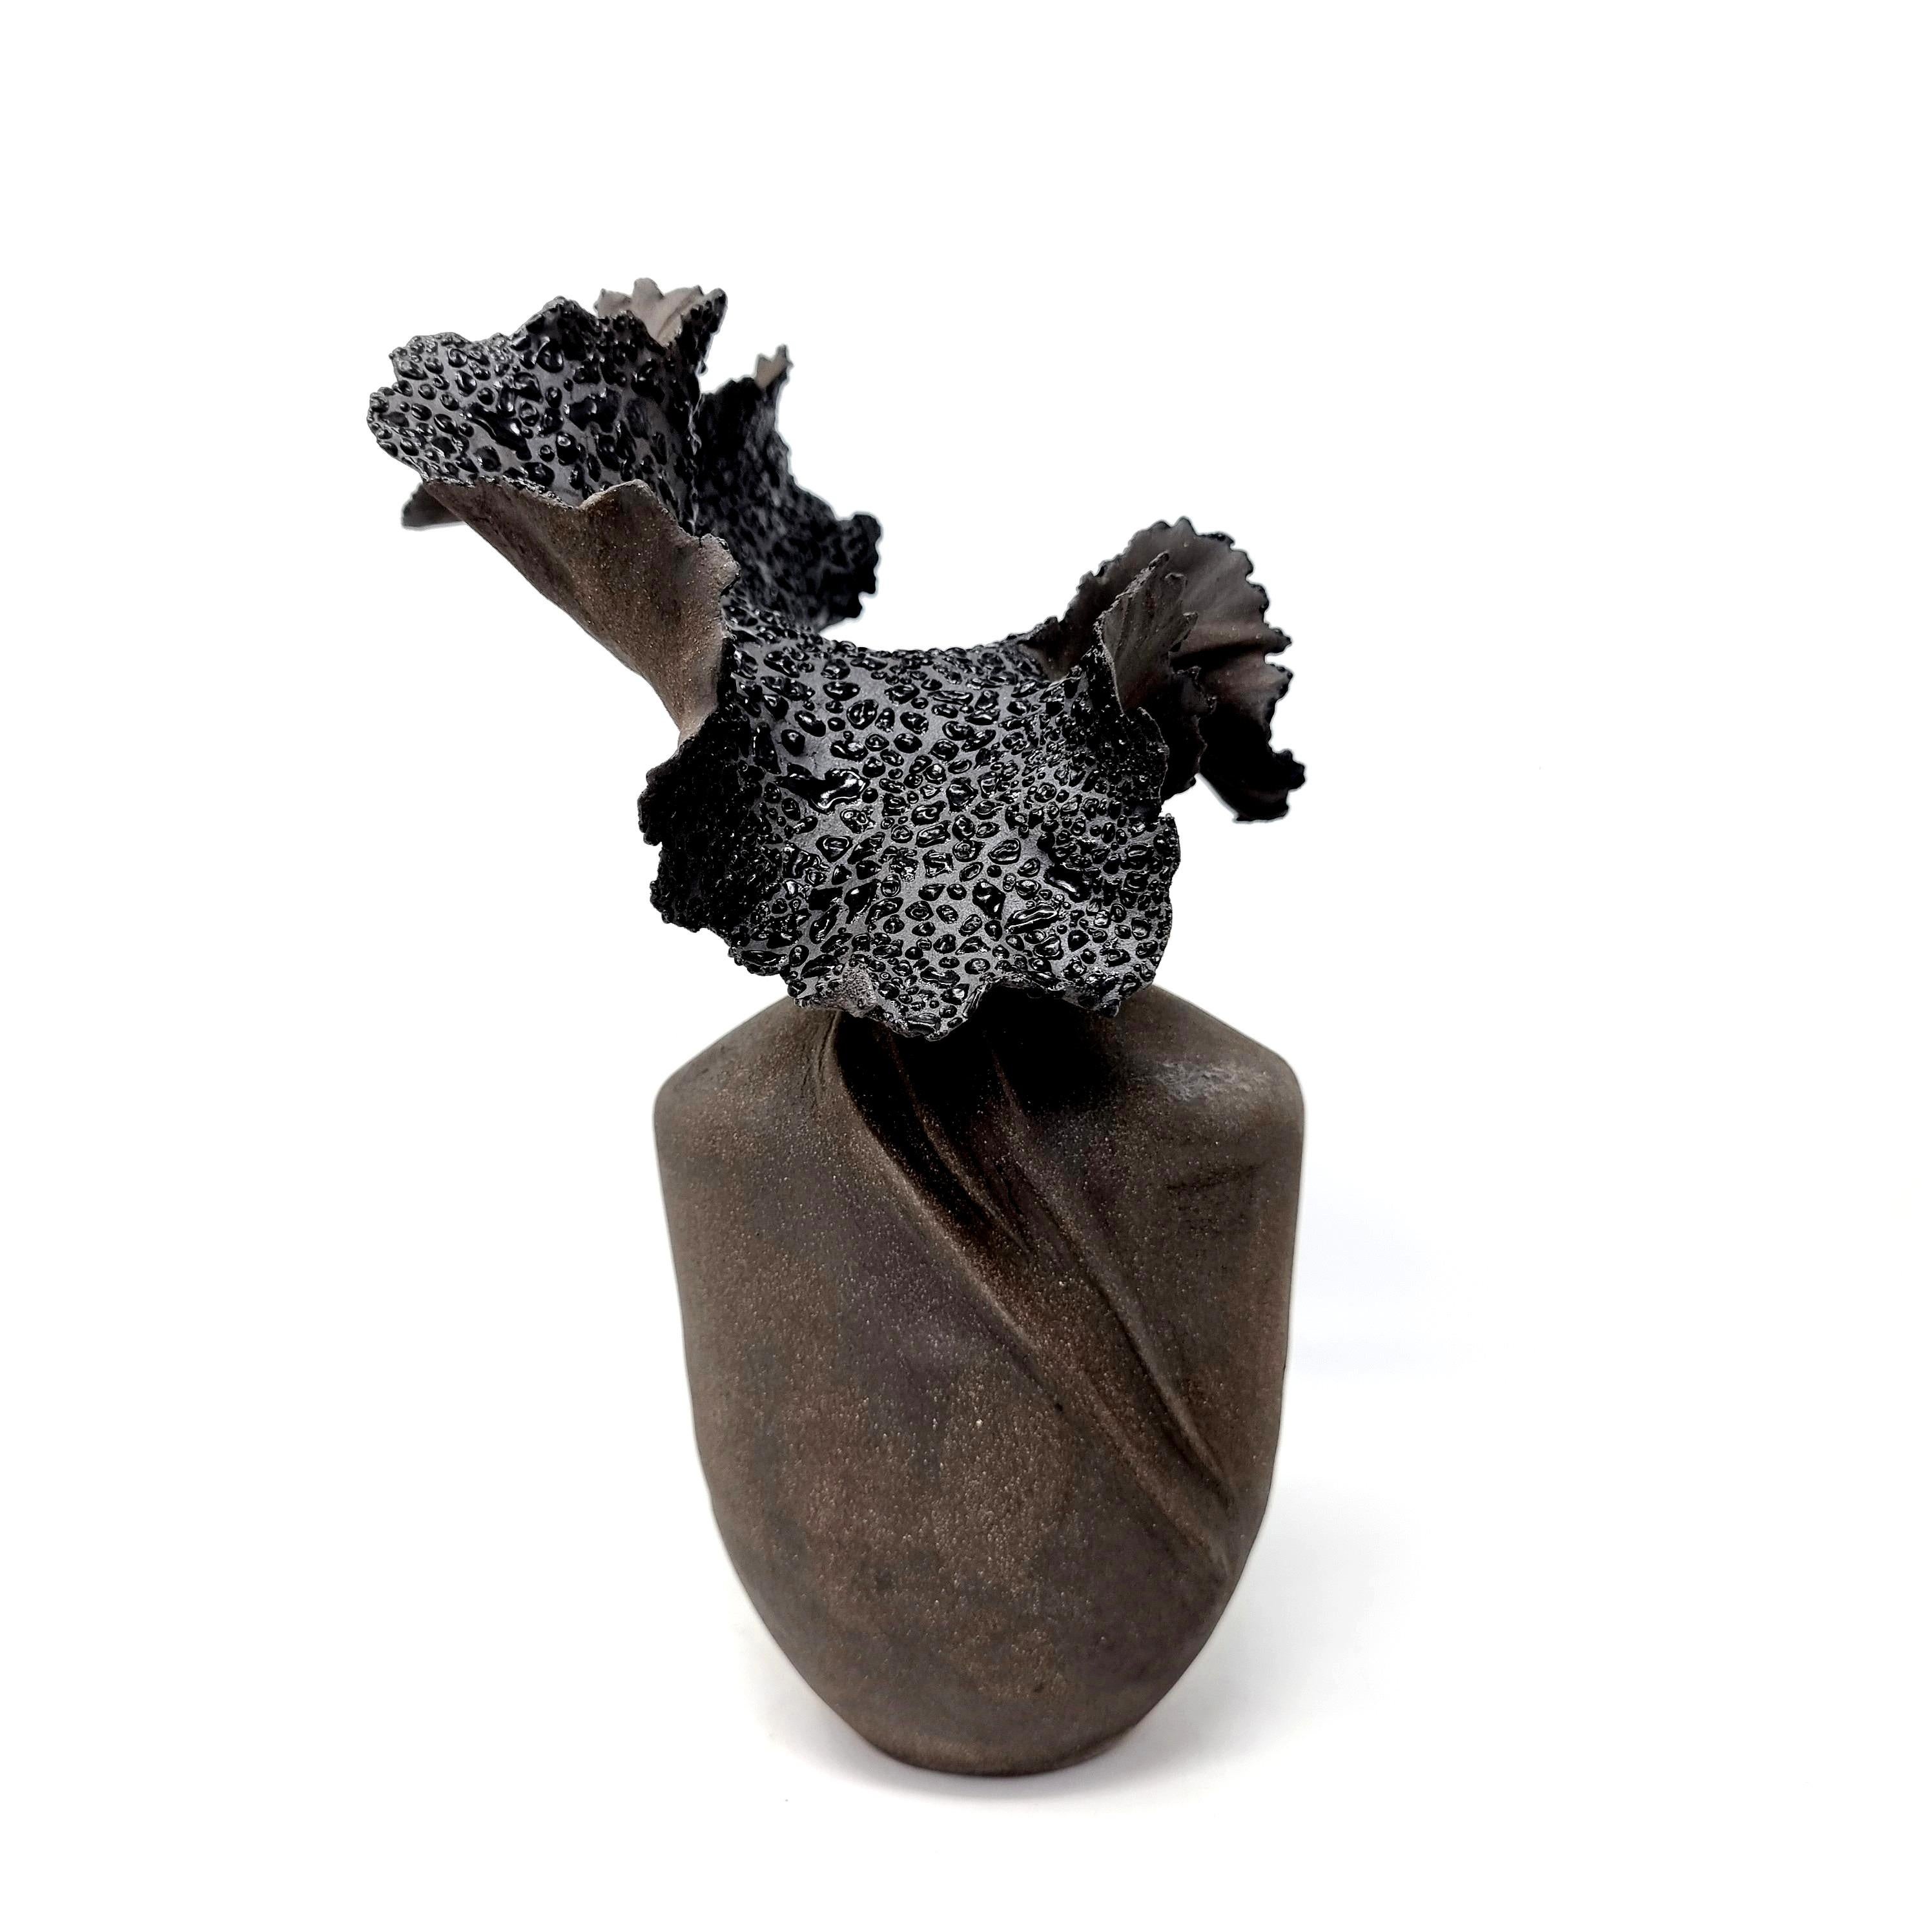 Hand-Crafted Black Stonewear Bouque Sculpture // 184